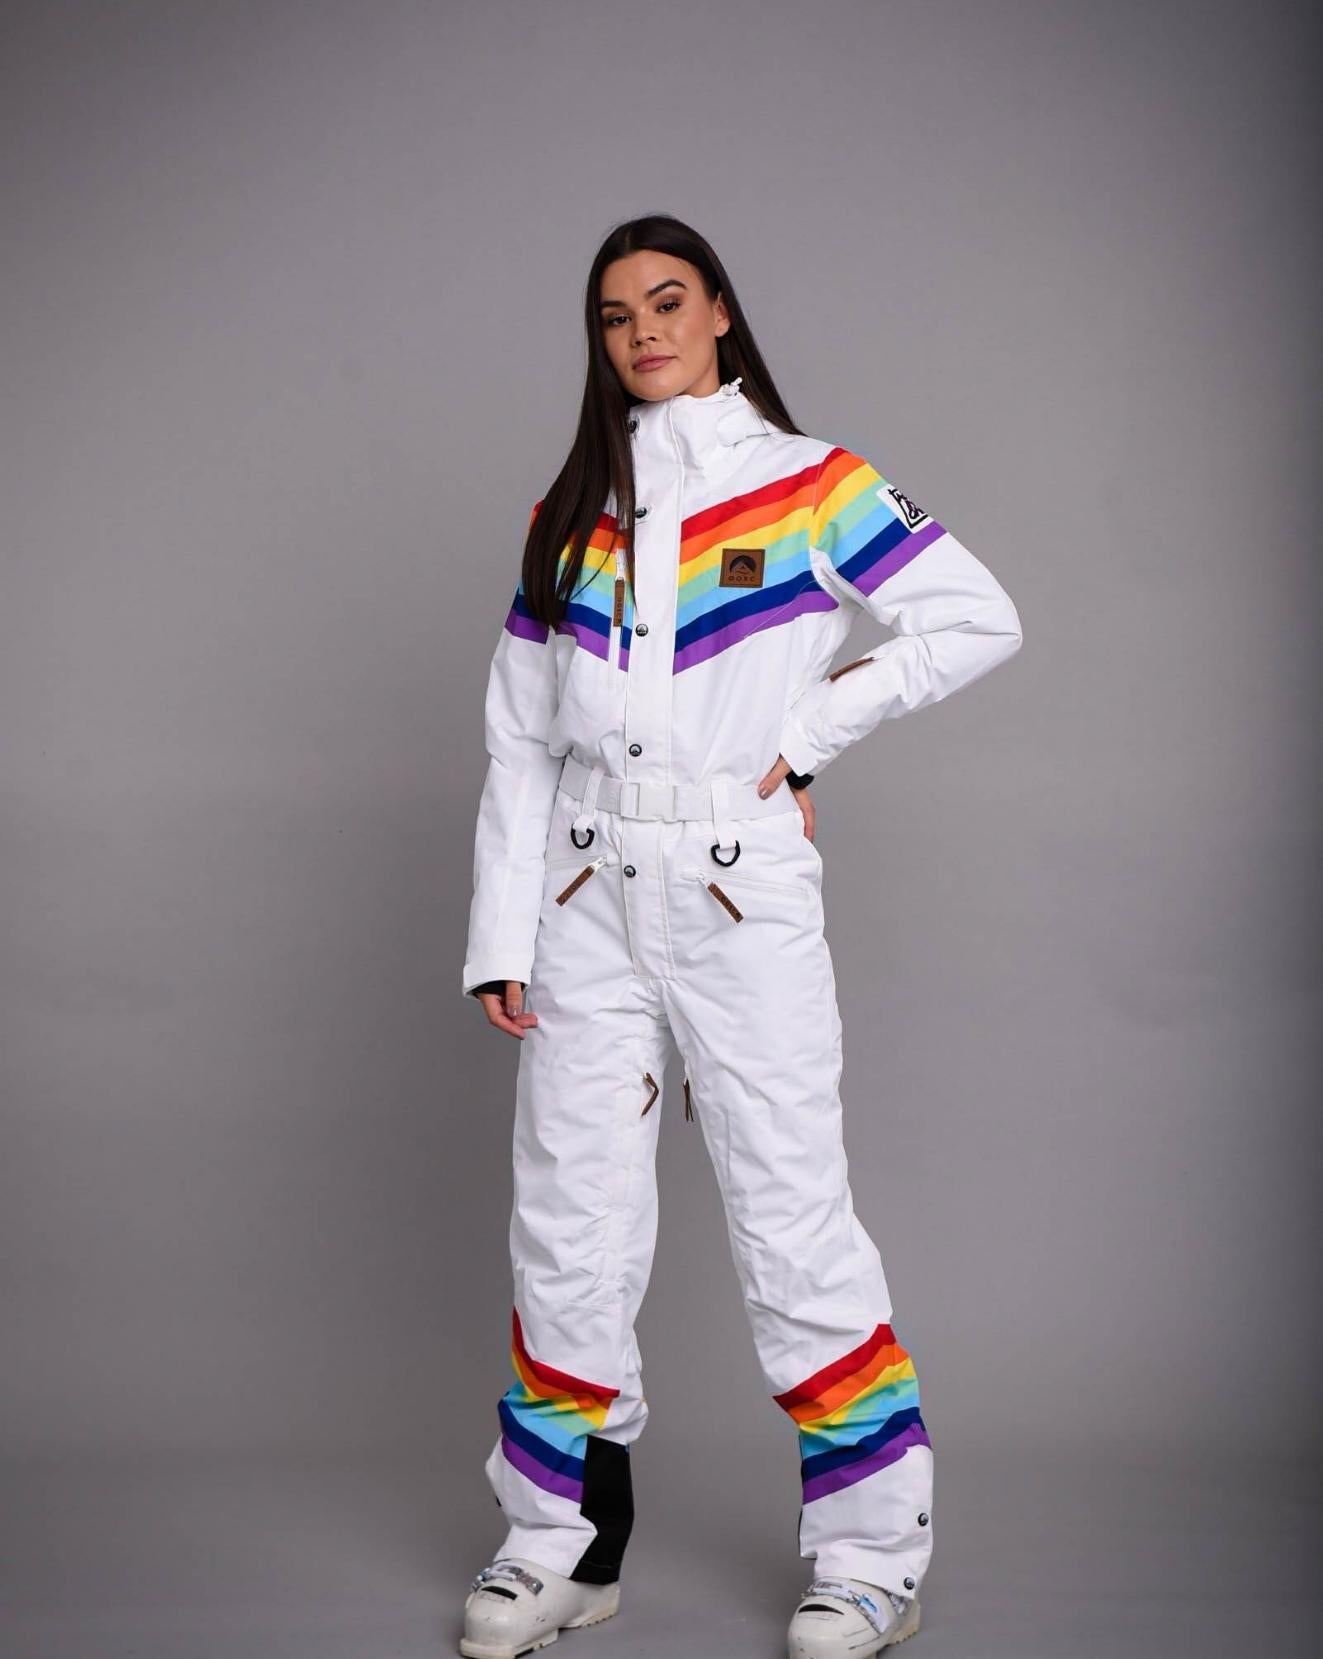 OOSC Rainbow Road Ski Suit Curved Fit - Women 